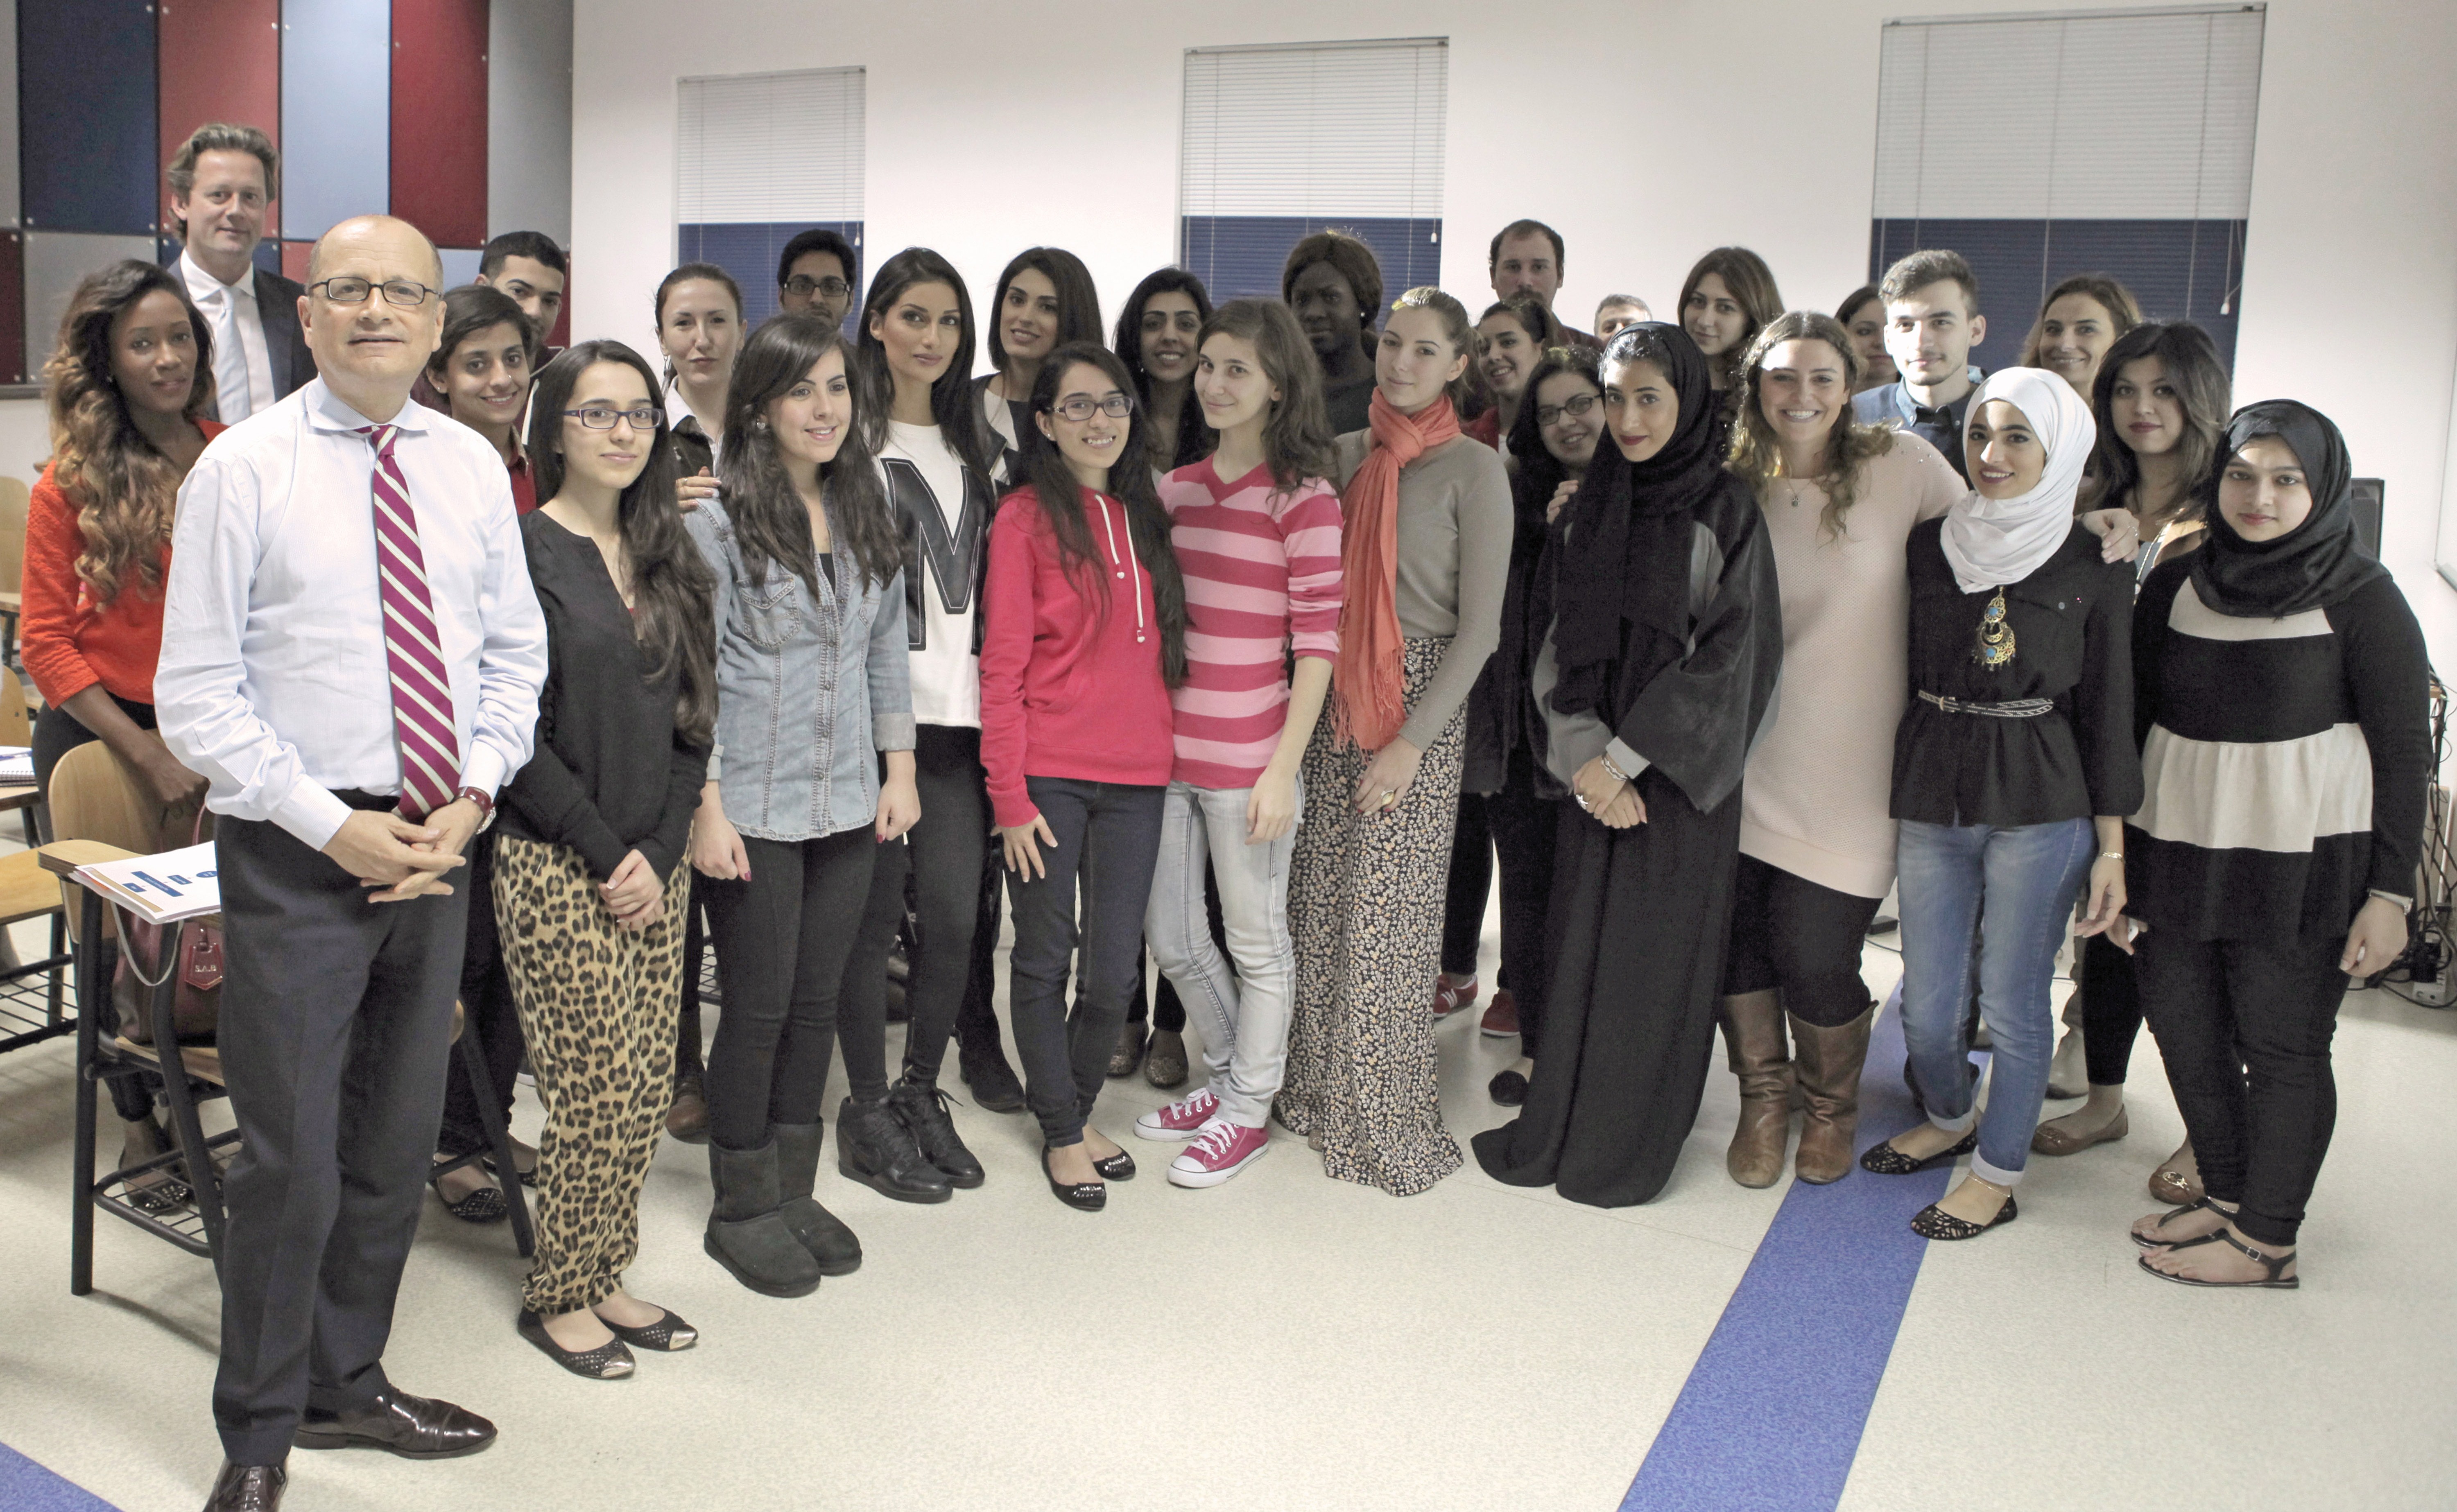 JWT partners with AUD for integrated marketing communications course